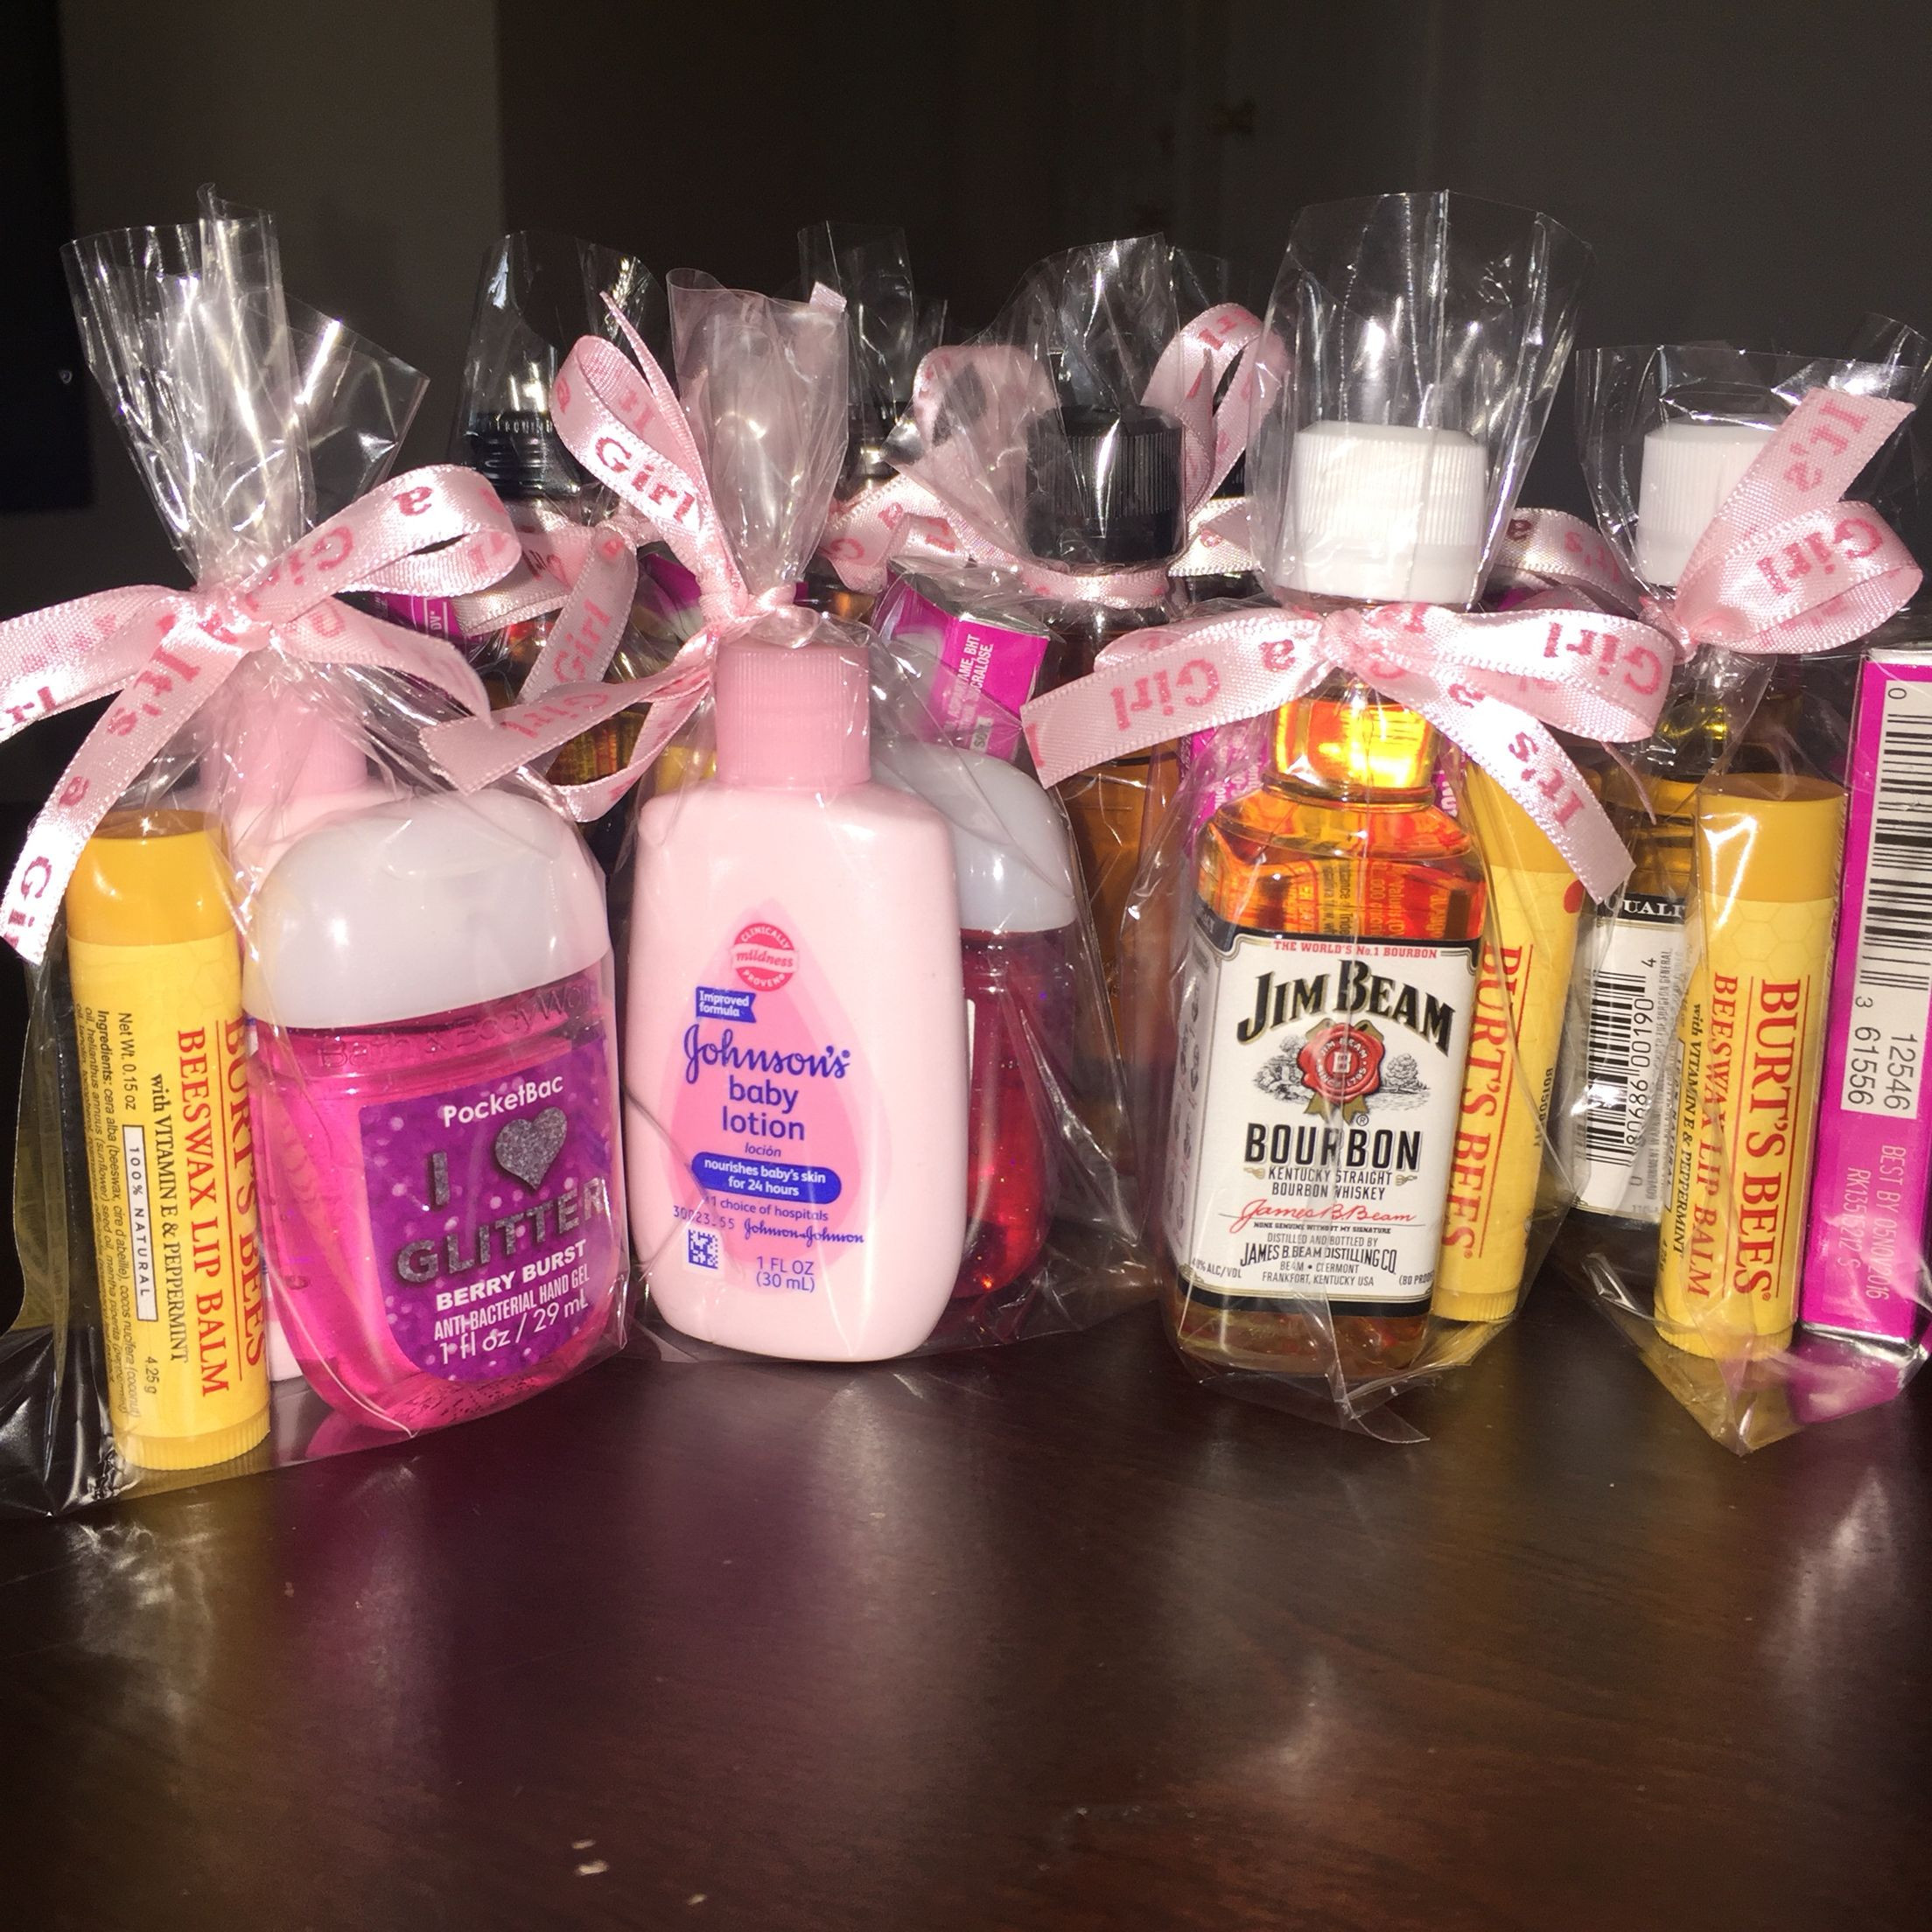 Party Favors For Baby Shower Guests
 baby shower favors for guests women s Burt s Bees lip